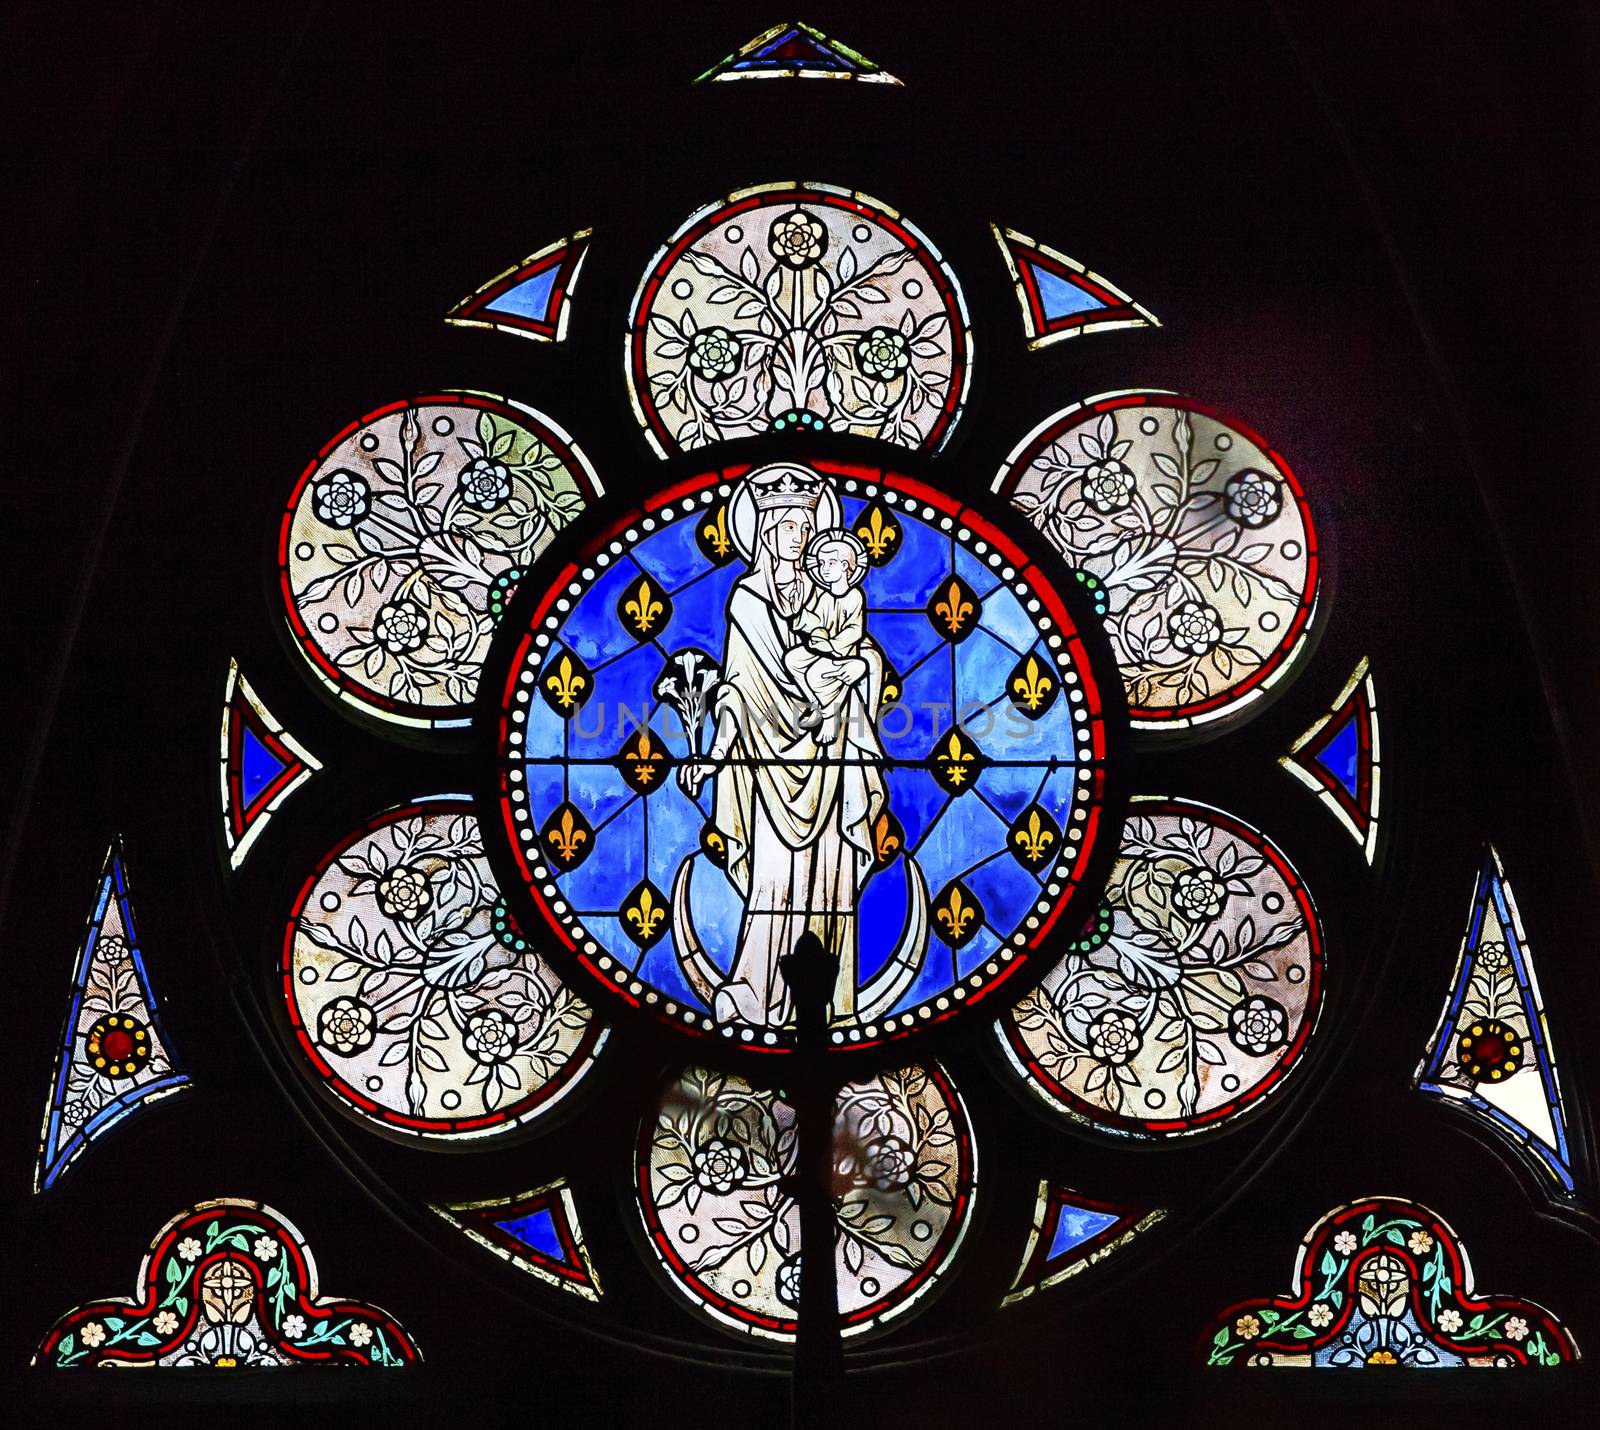 White Mary Jesus Christ Stained Glass Notre Dame Cathedral Paris France.  Notre Dame was built between 1163 and 1250AD.  